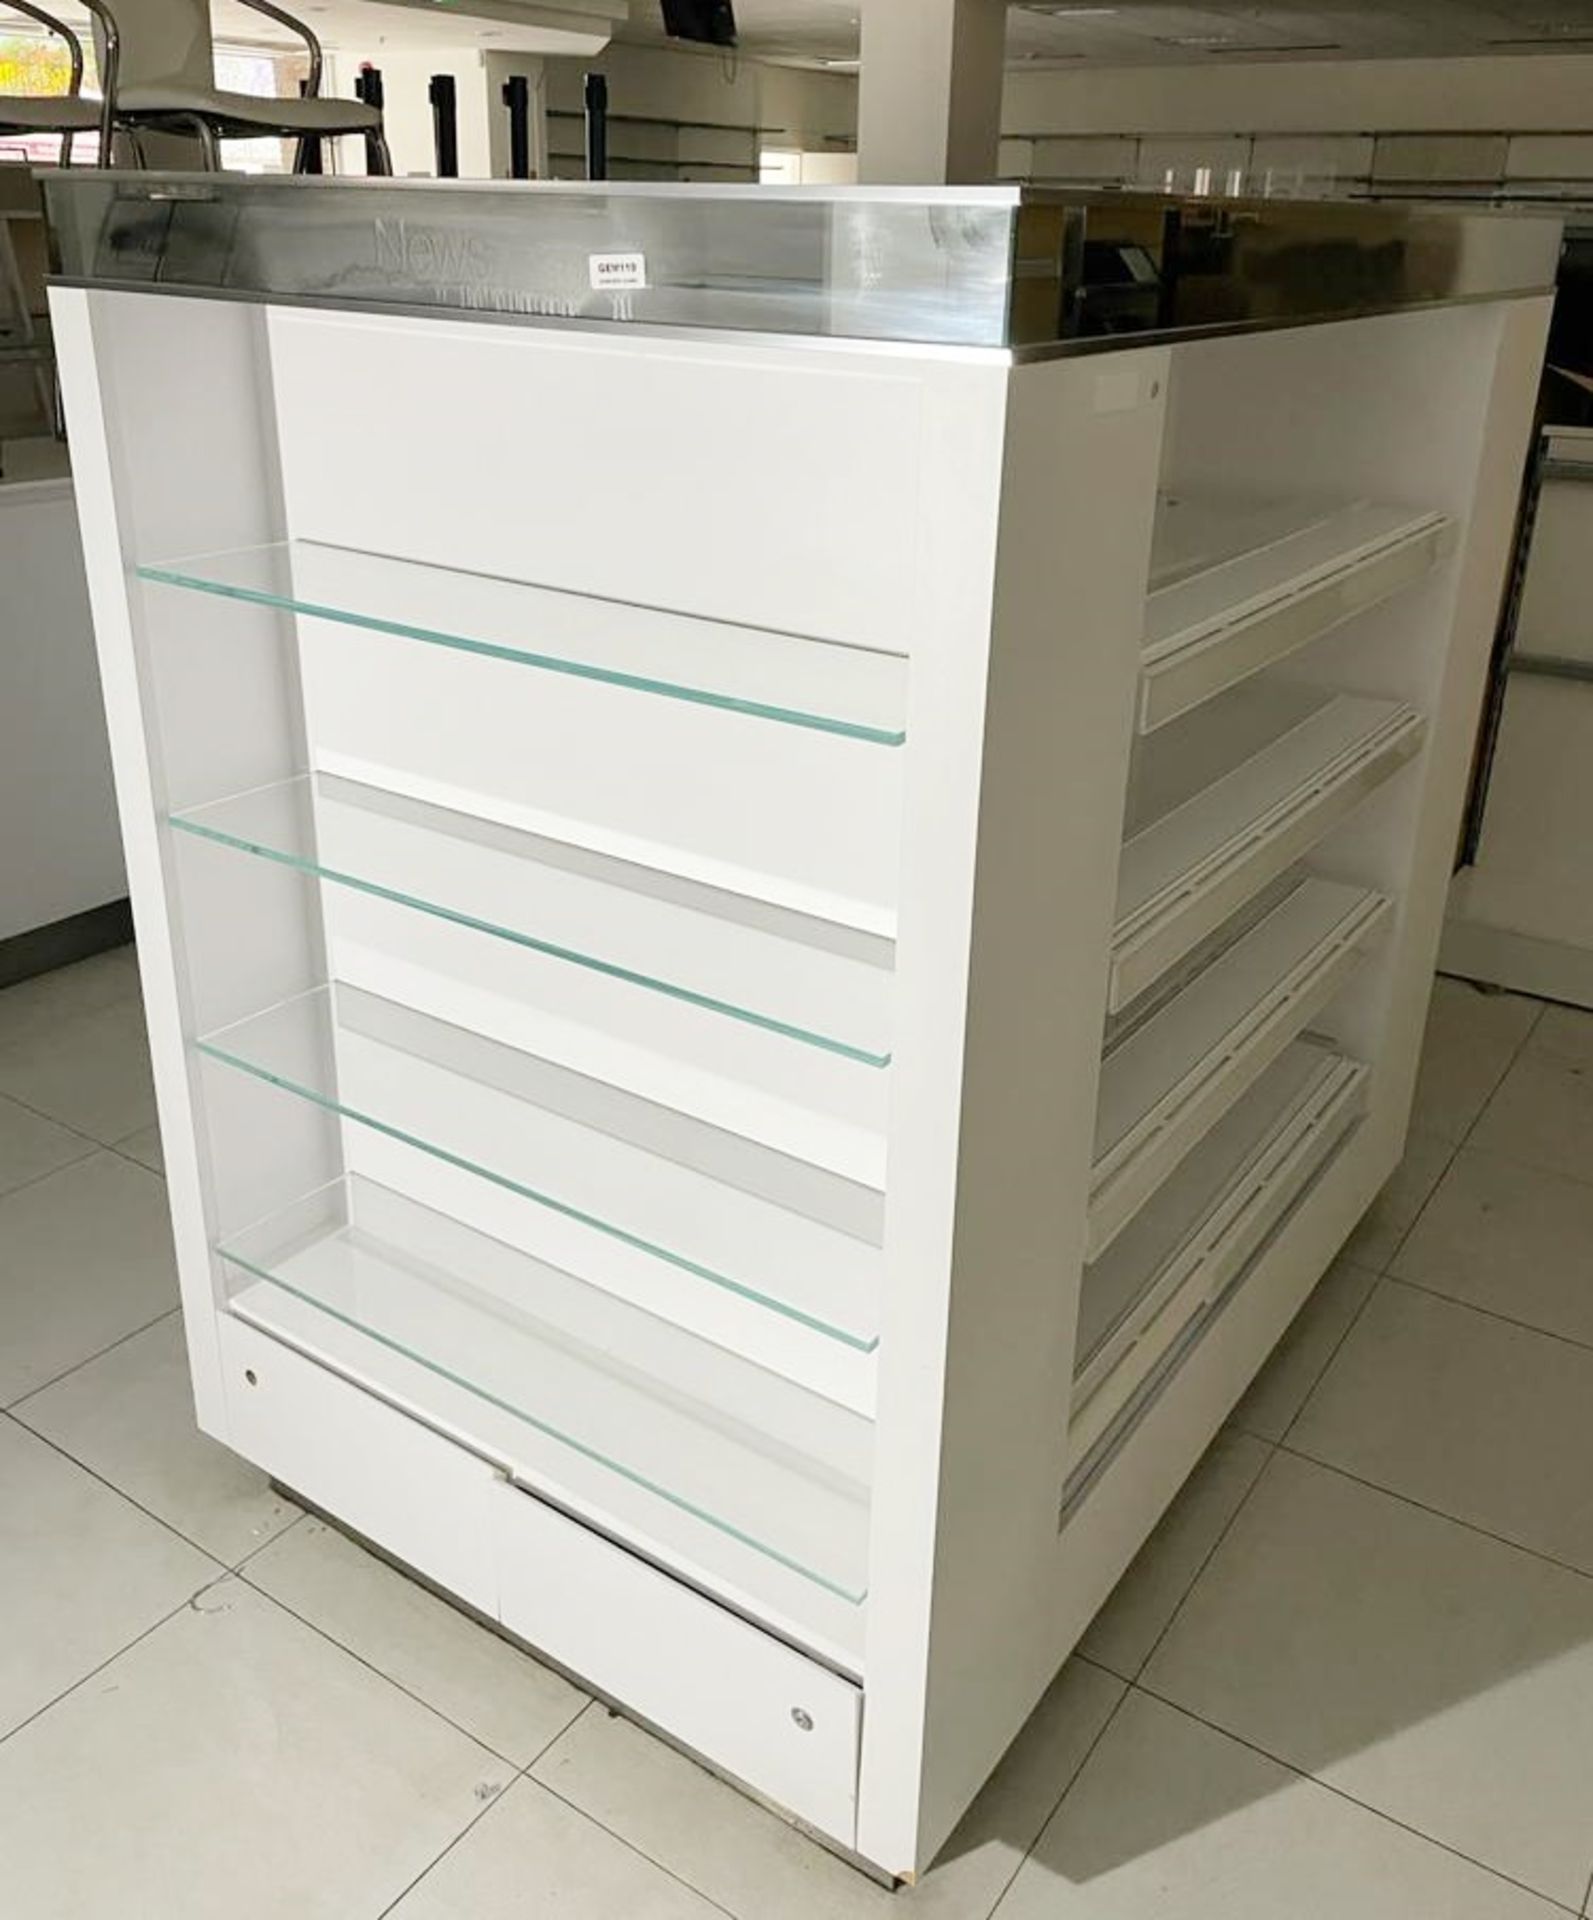 1 x Retail Four Sided Display Island With Shelves, Storage Drawers and Mirrored Panels - Size H150 x - Image 10 of 10